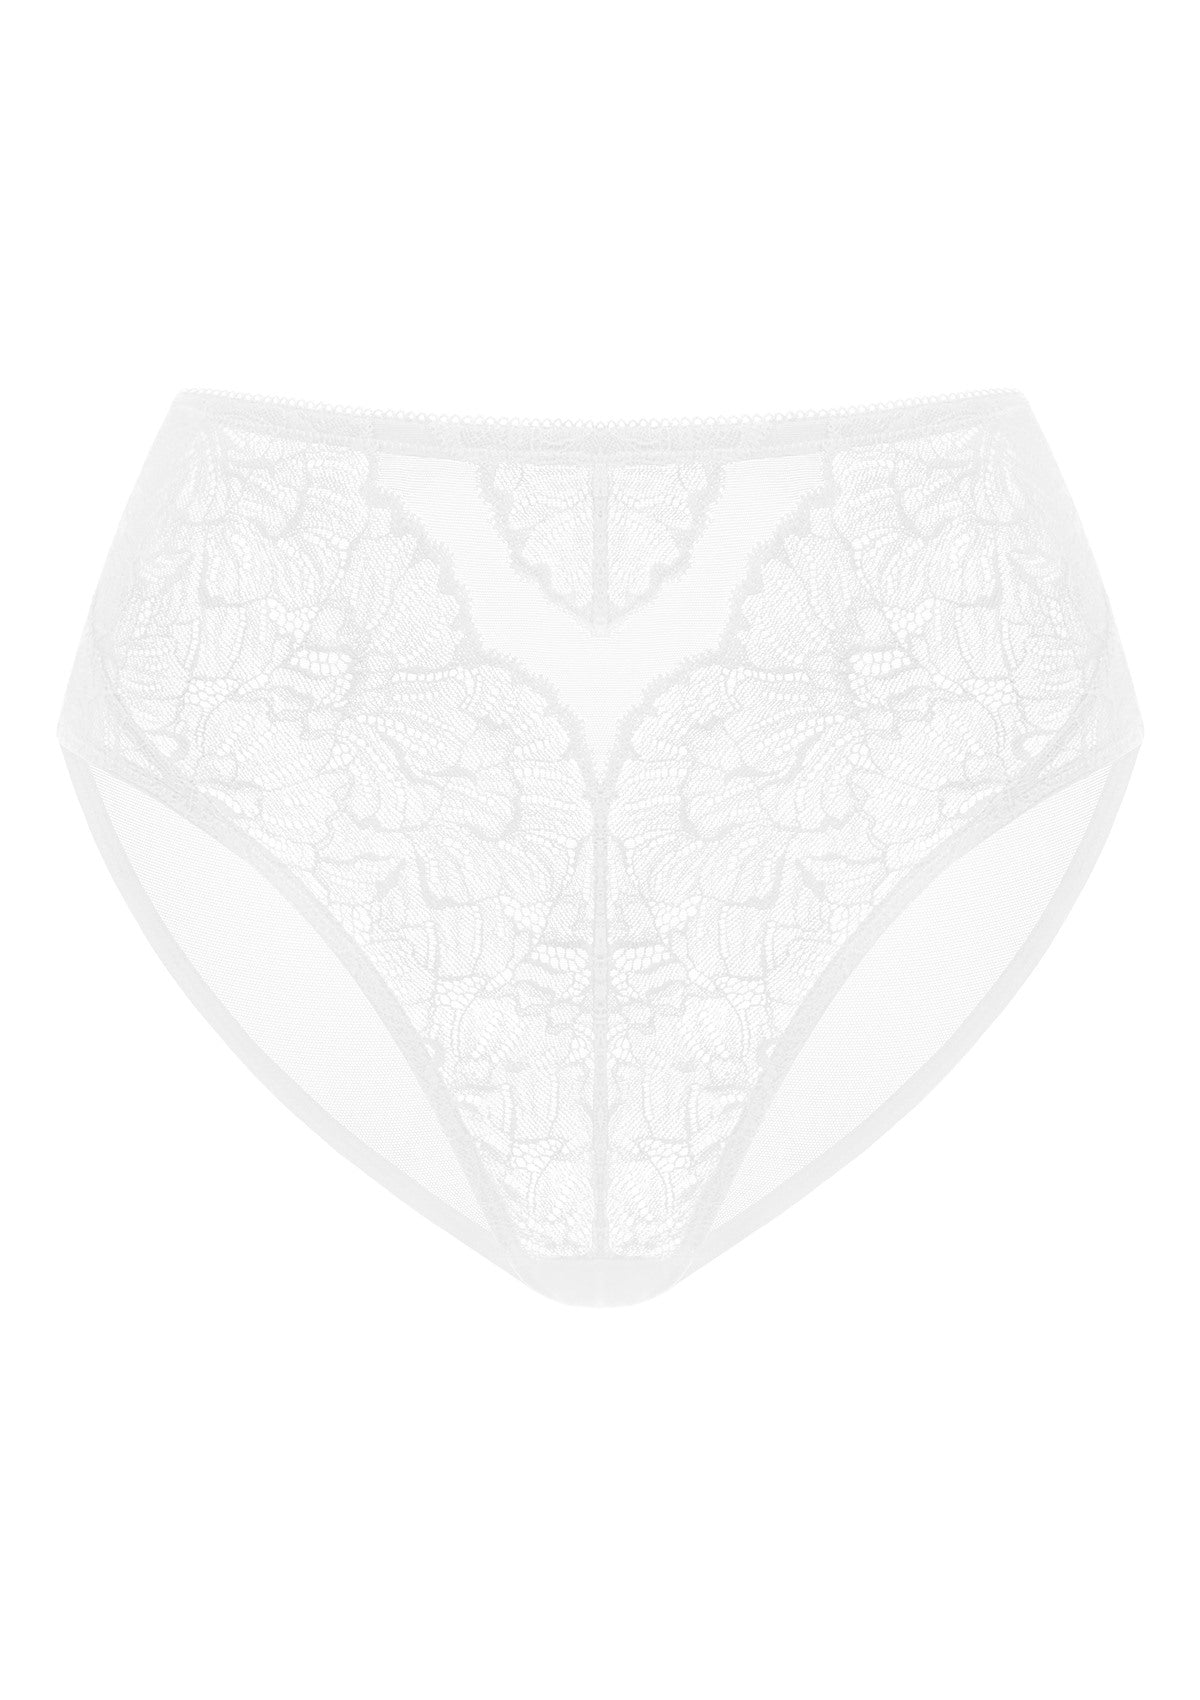 HSIA Blossom High-Rise Floral Lacy Panty-Comfort In Style - M / Dusty Peach